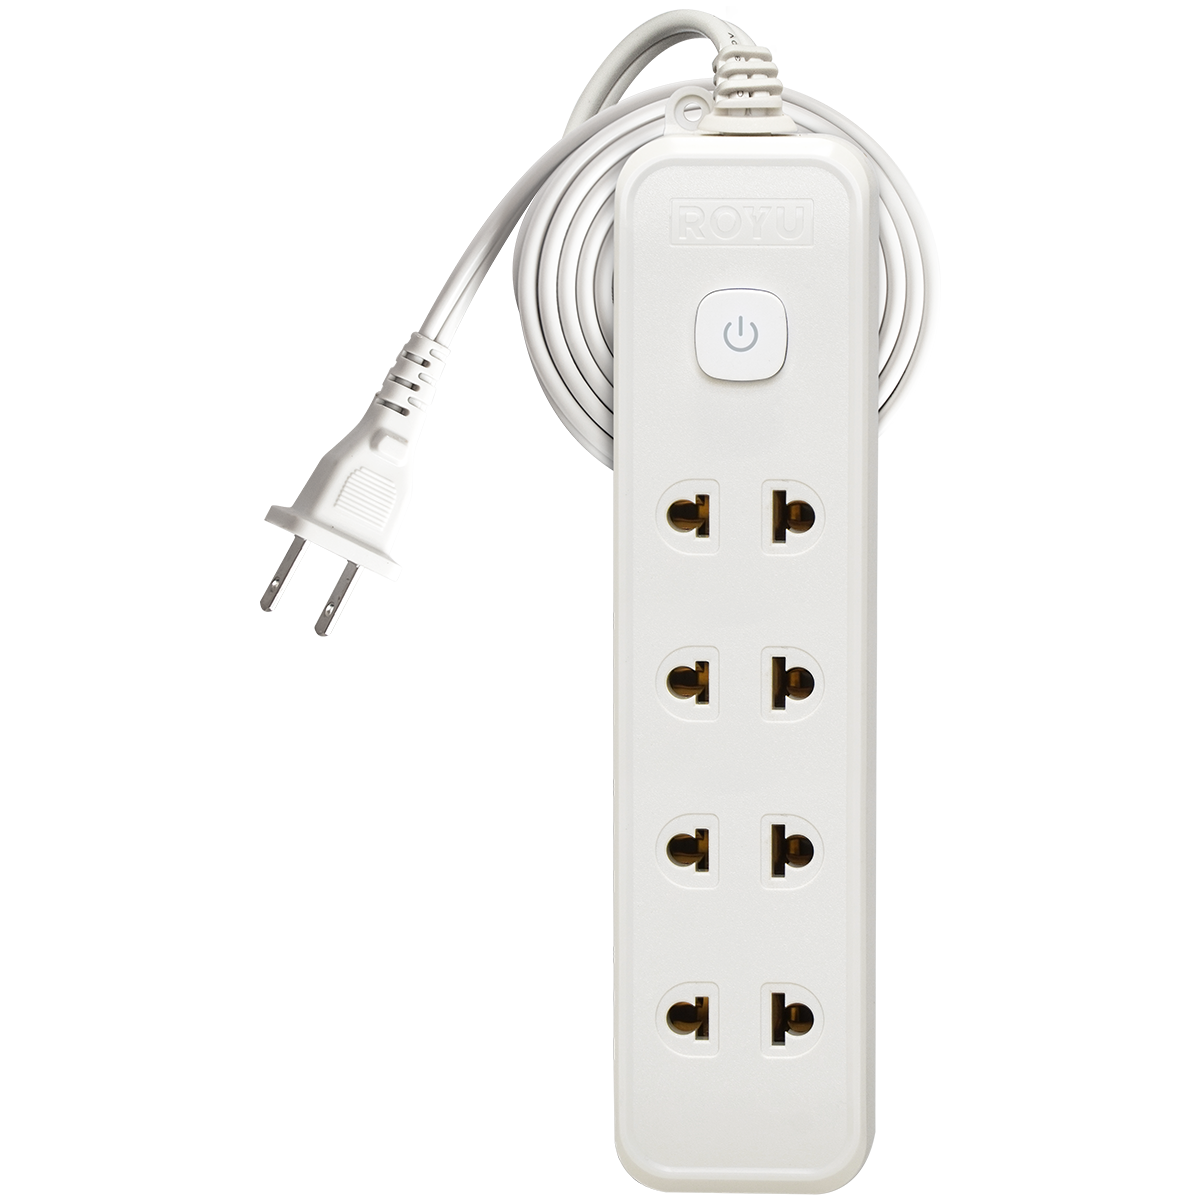 ROYU 4+1 GANG Extension Cord with Push Button Switch (3M Extension)